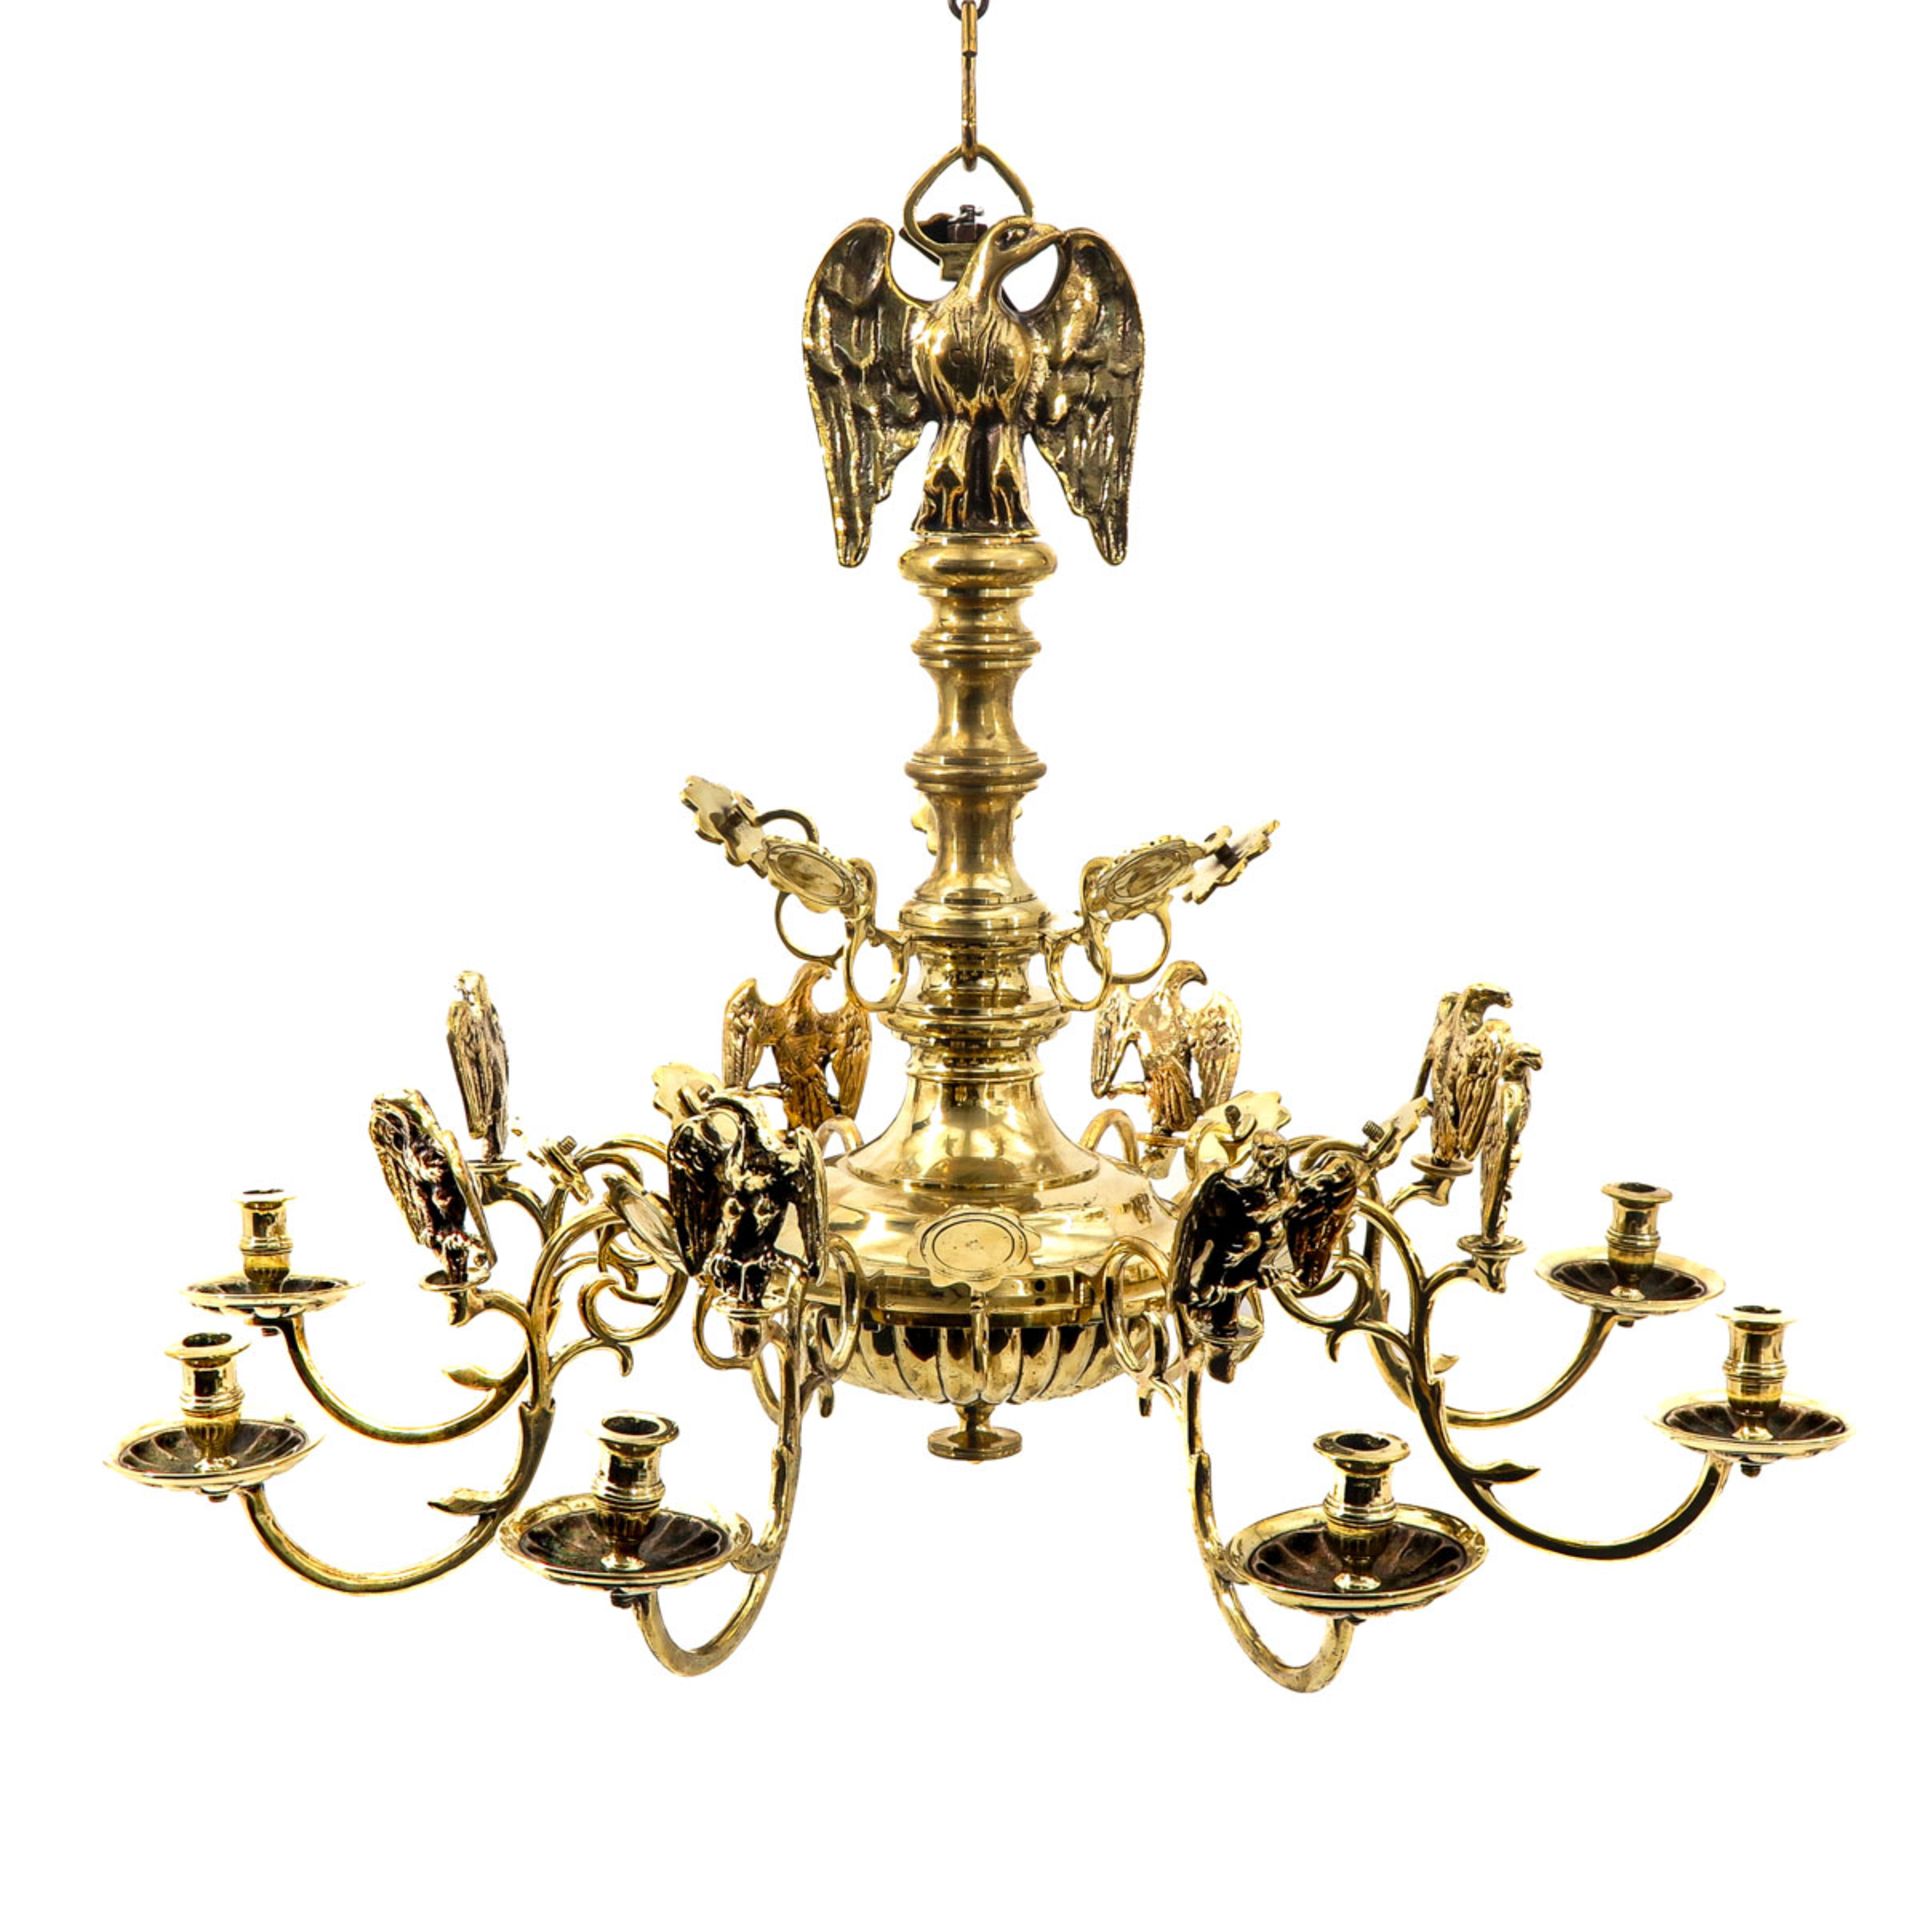 An Empire Candle Chandelier